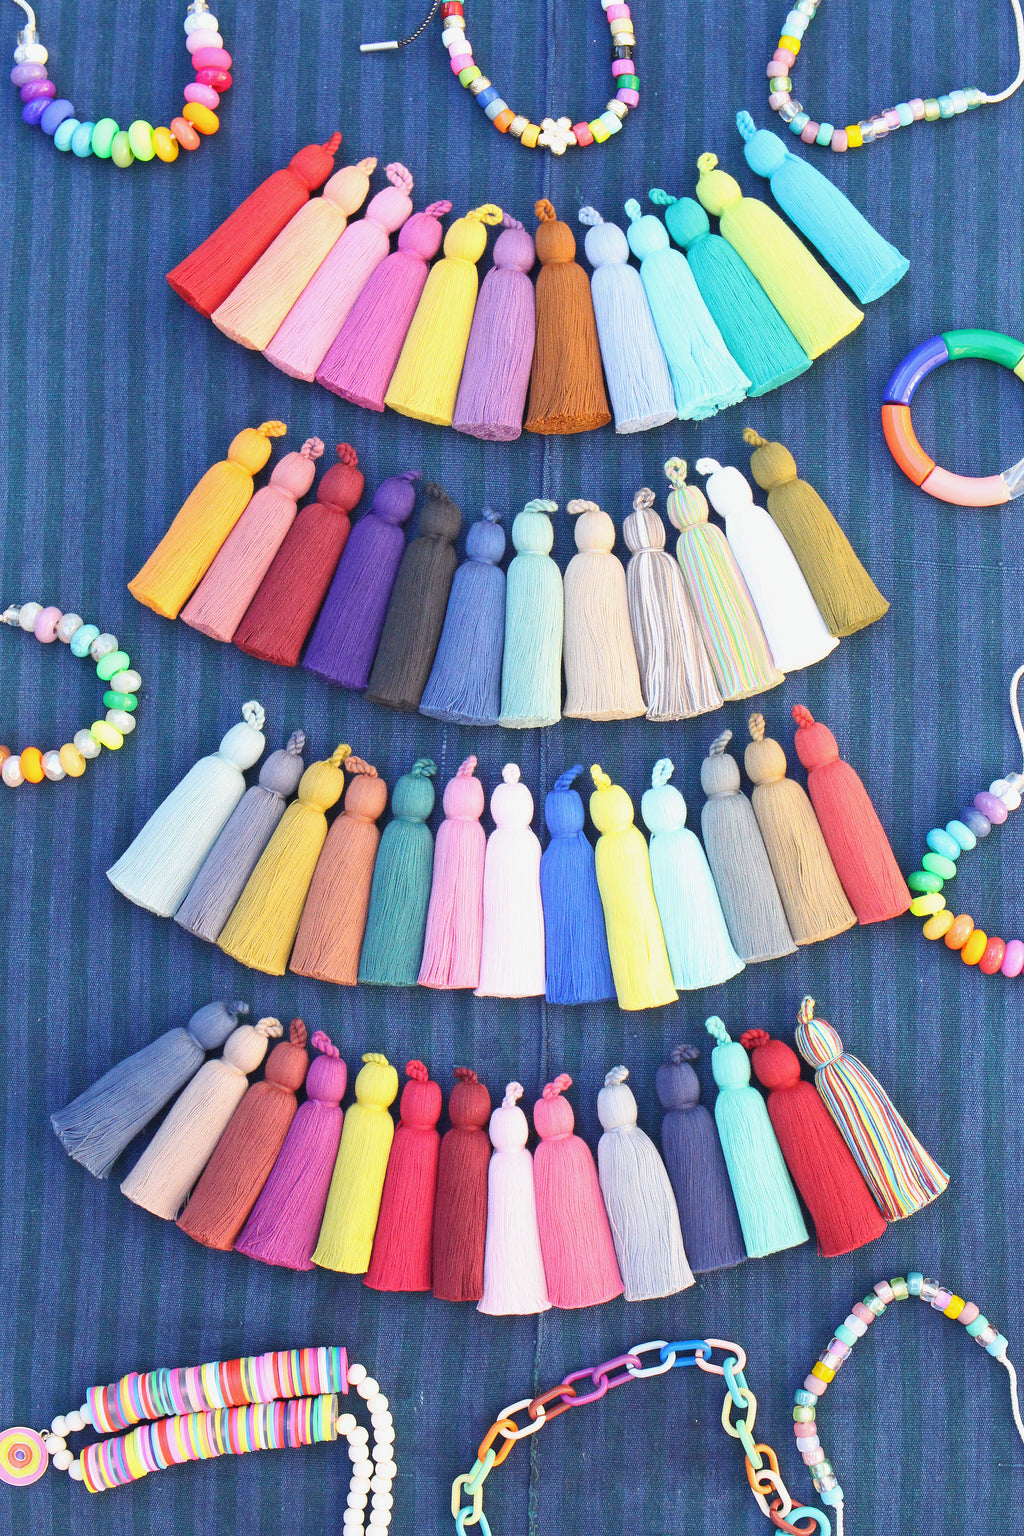 How to Make DIY Tassels for Jewelry from Wire and Cotton by Denise